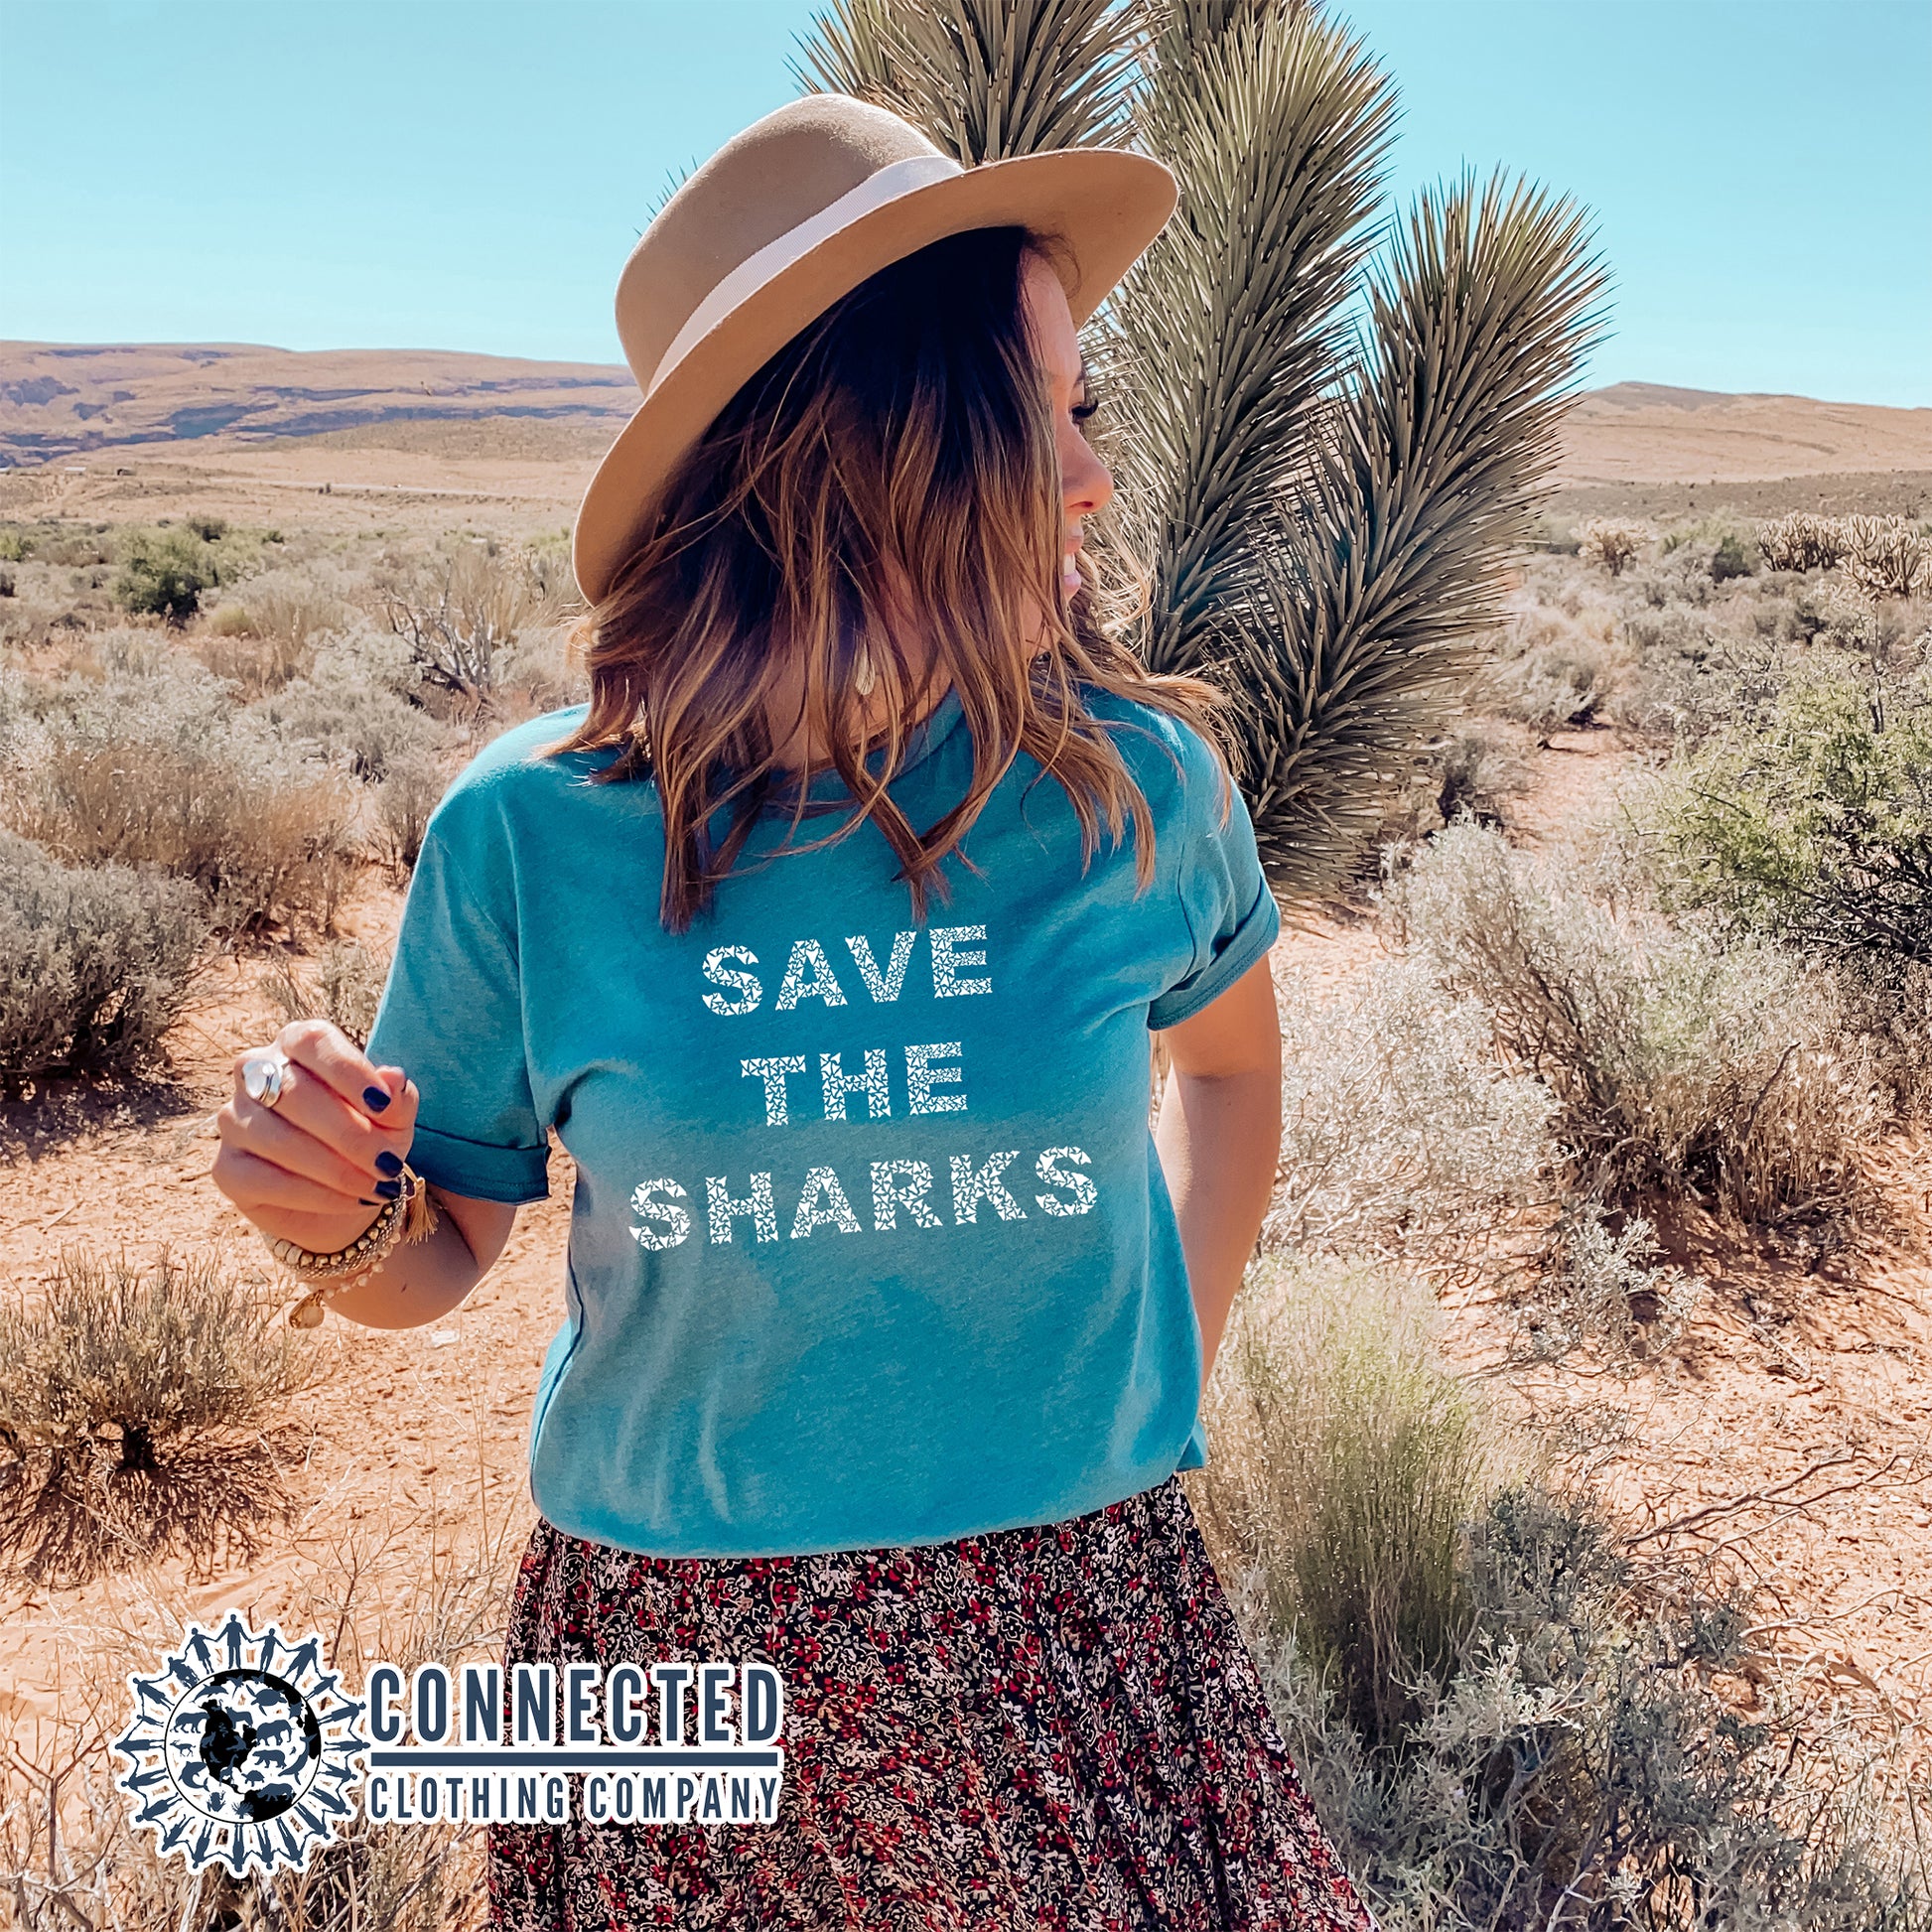 Aqua Blue Save The Sharks Short-Sleeve Unisex T-Shirt reads "Save The Sharks." - architectconstructor - Ethically and Sustainably Made - 10% donated to Oceana shark conservation